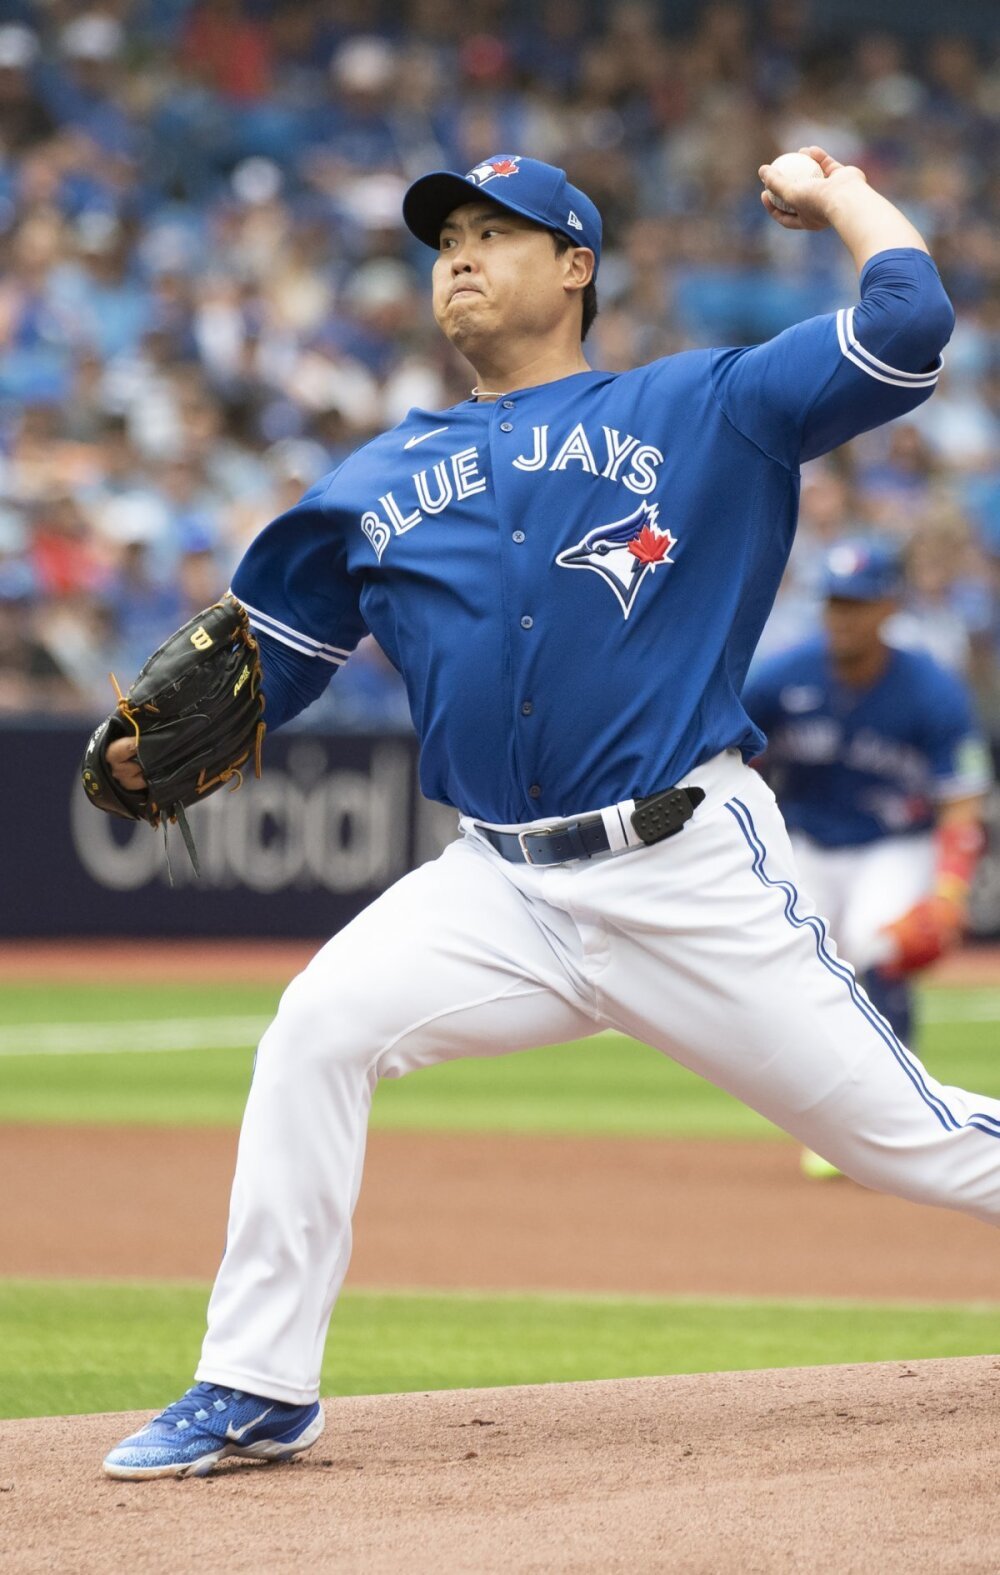 Hyun-Jin Ryu gets ball for Toronto Blue Jays on Opening Day 